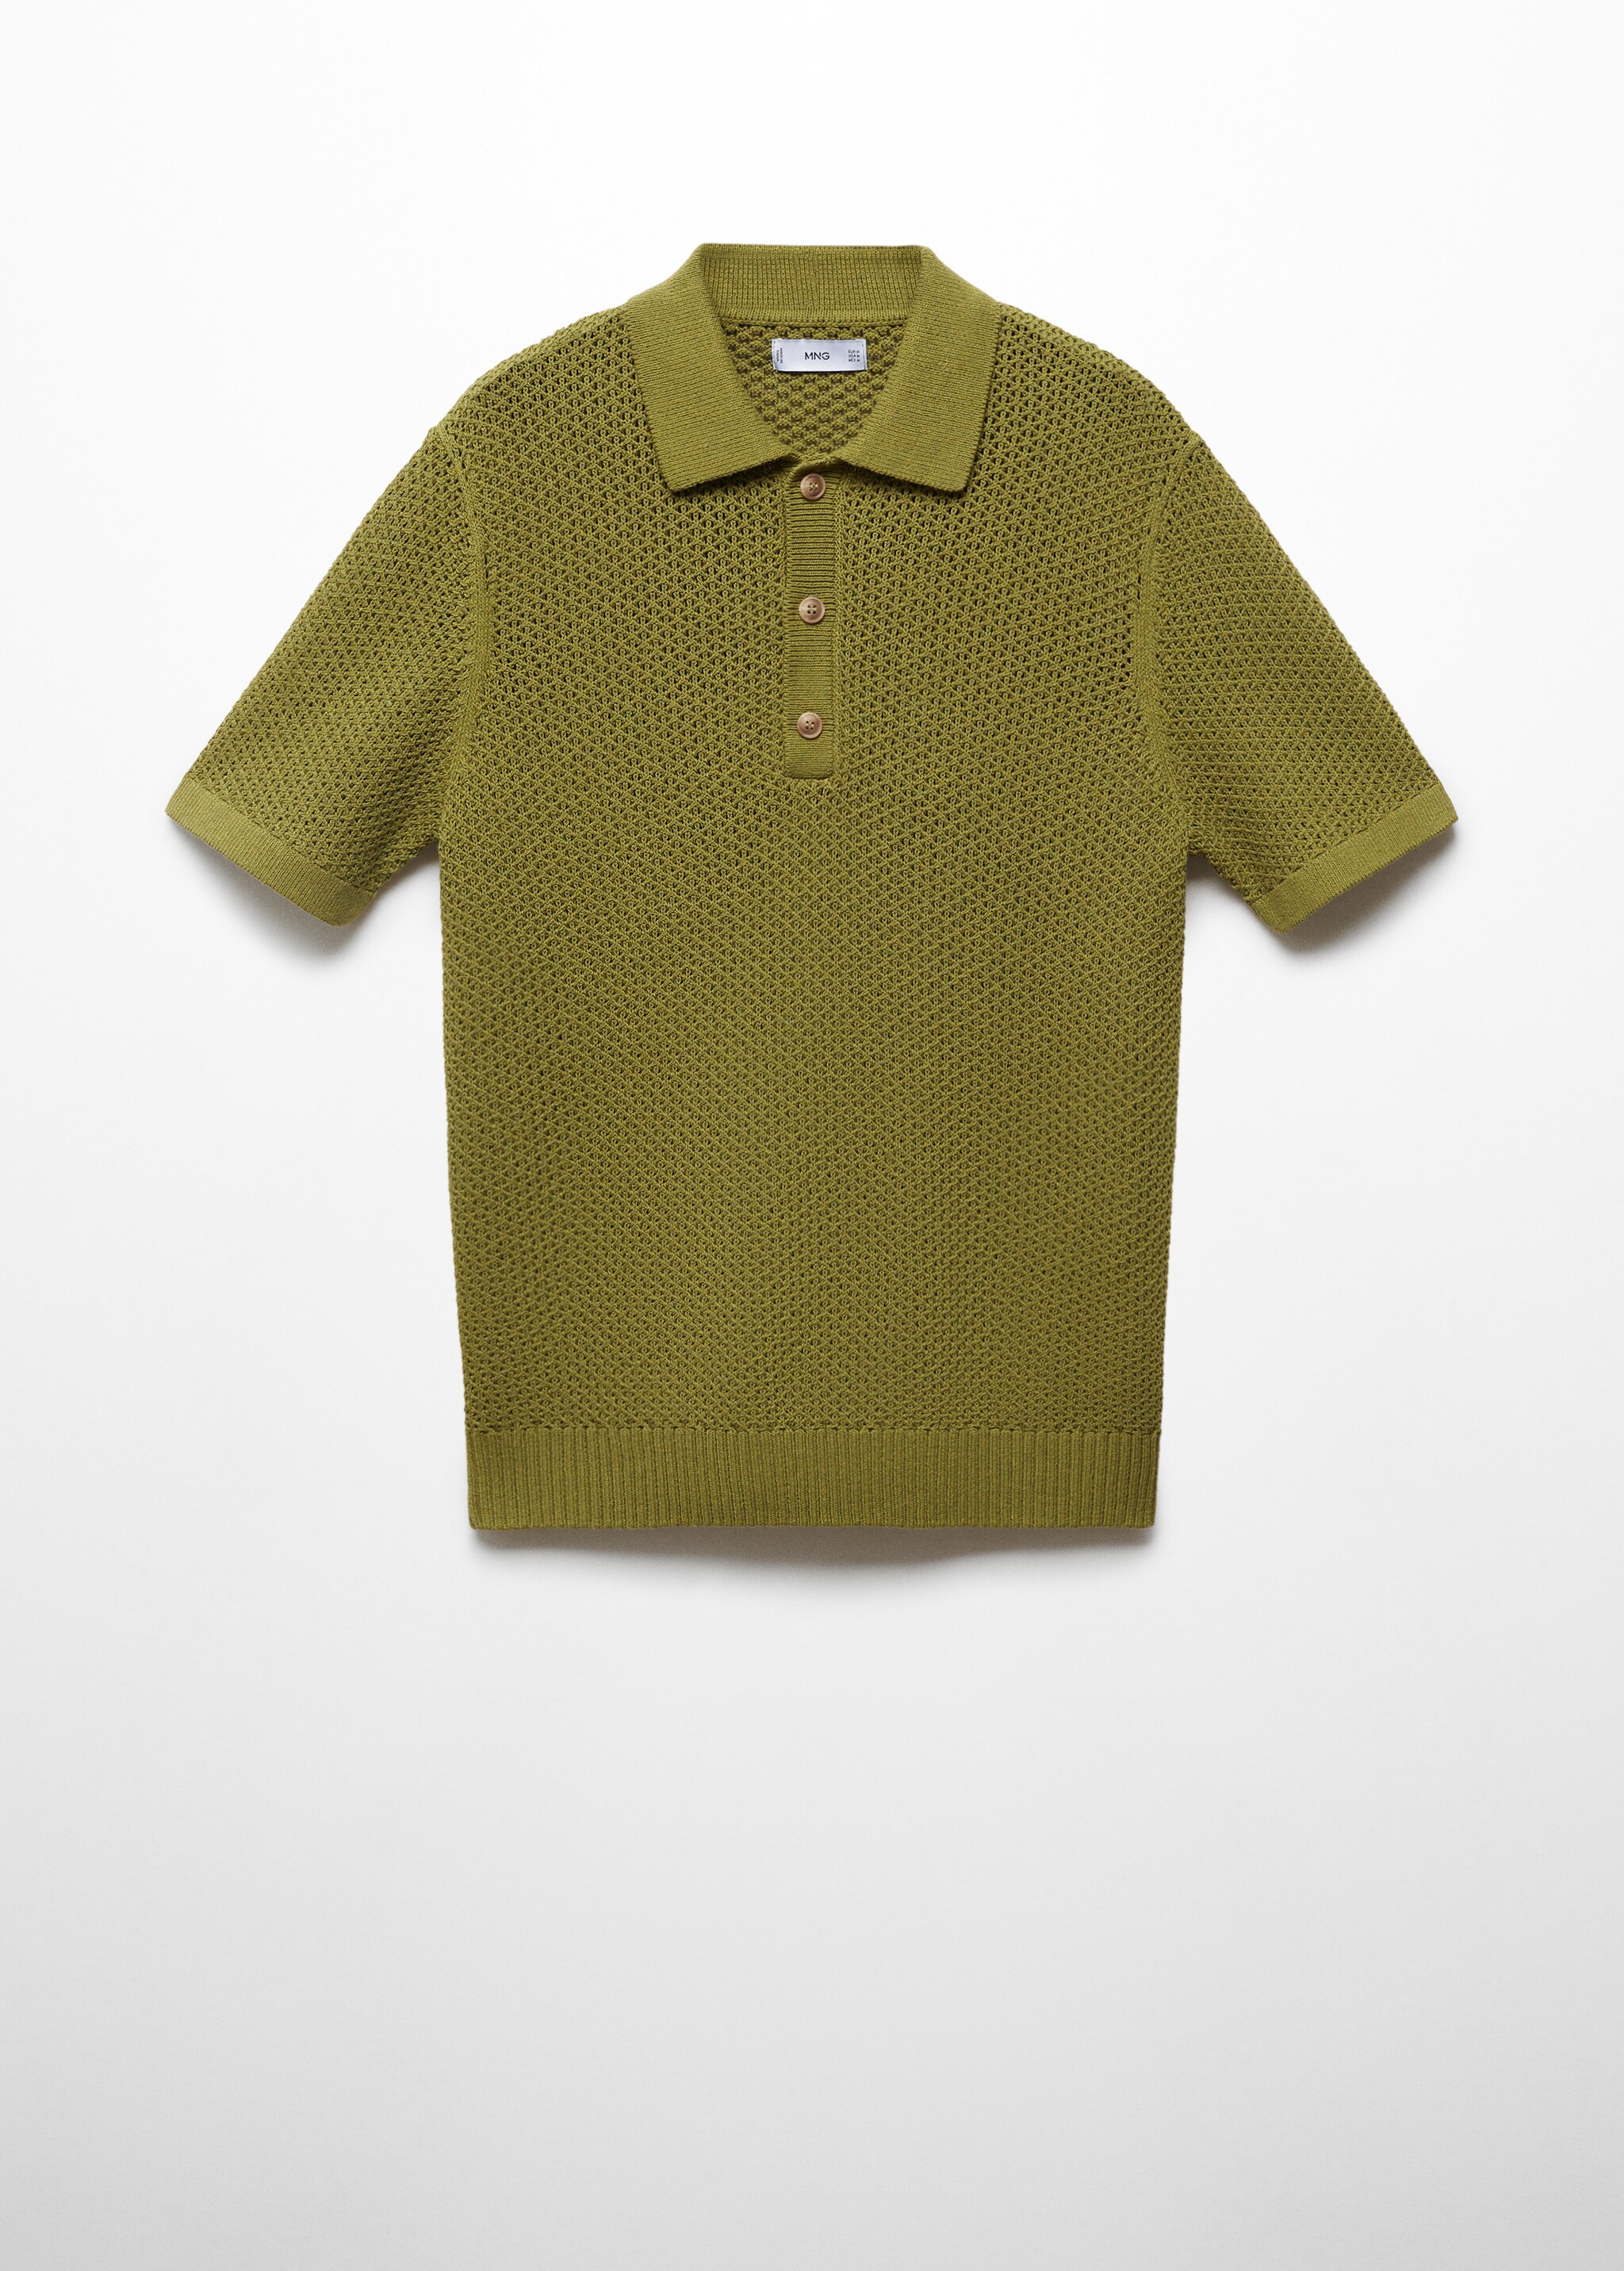 Braided knit polo shirt - Article without model